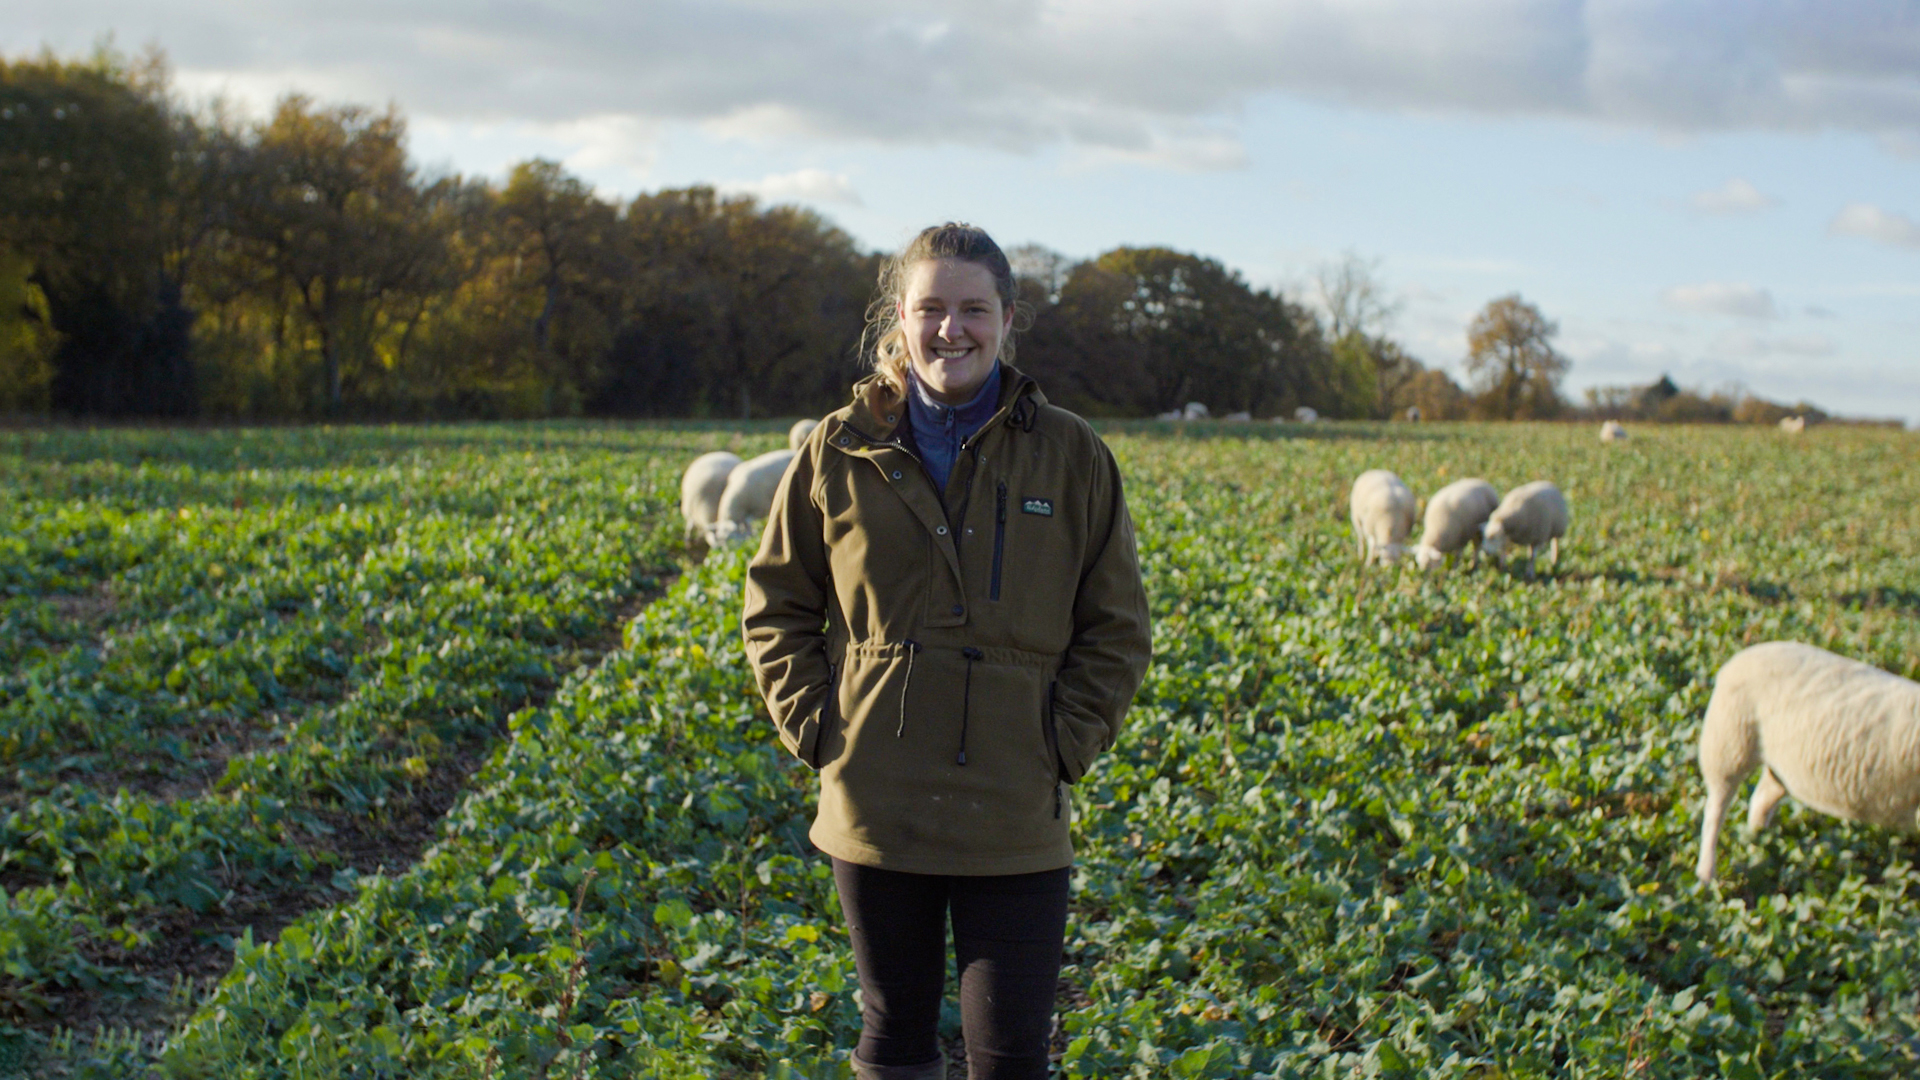 UK farmer in her crop field with sheep grazing